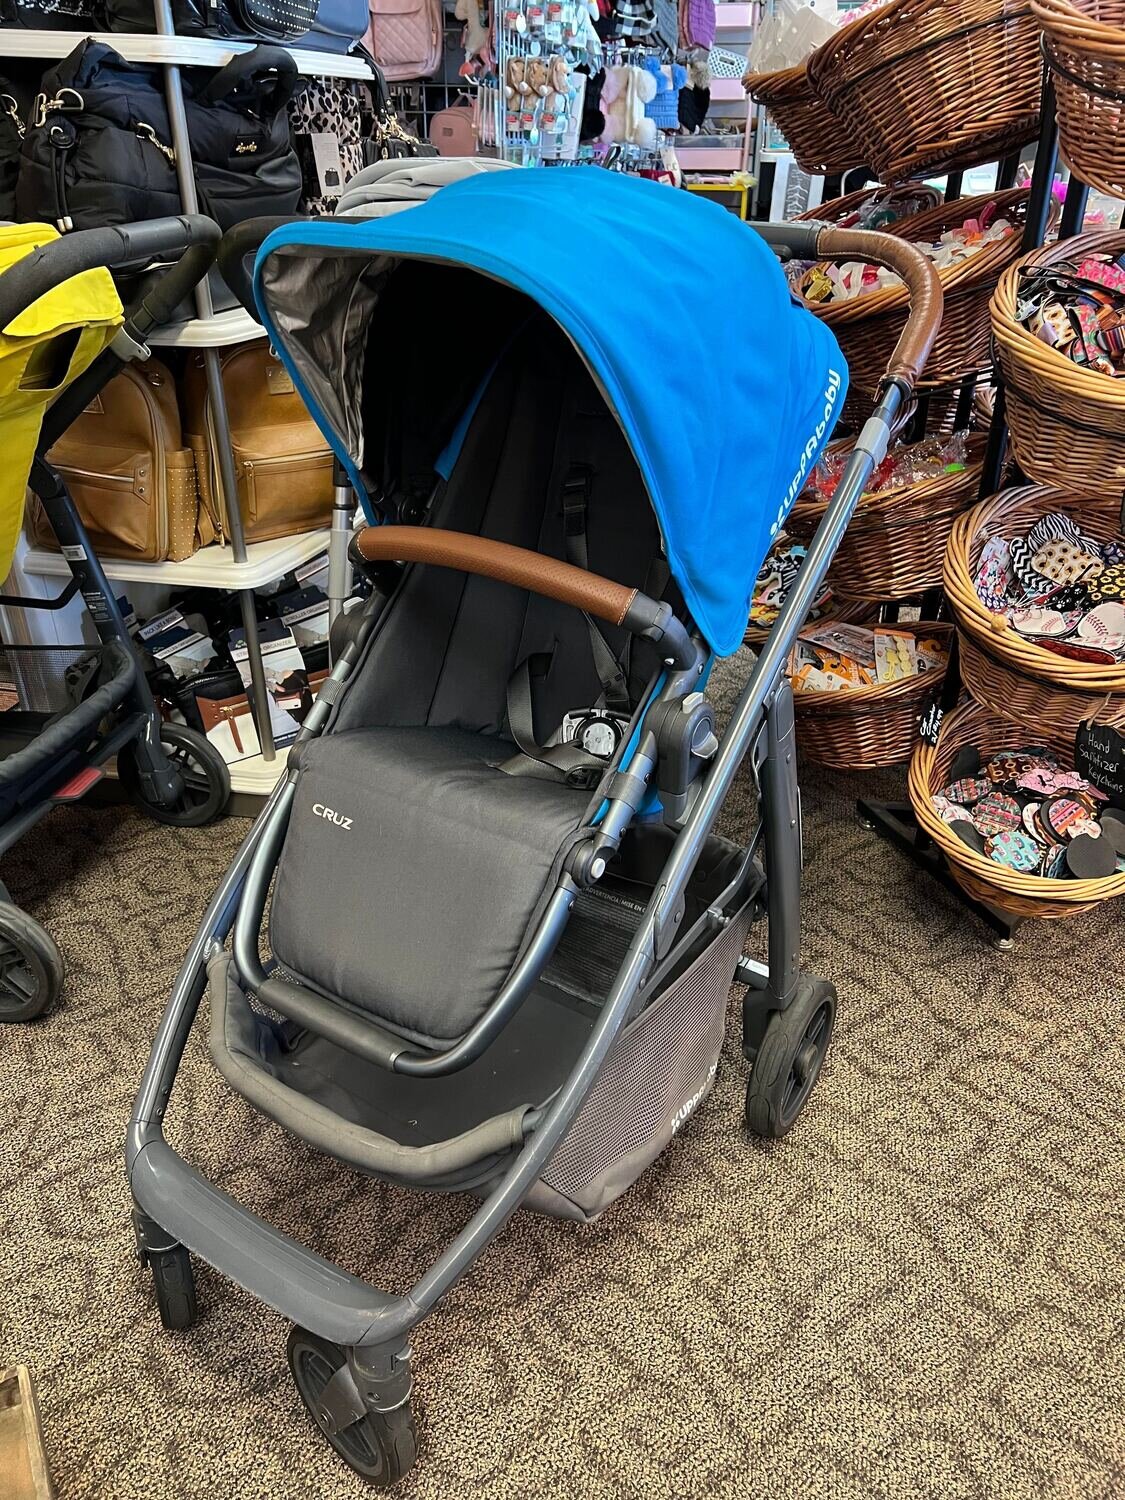 stroller with leather handle